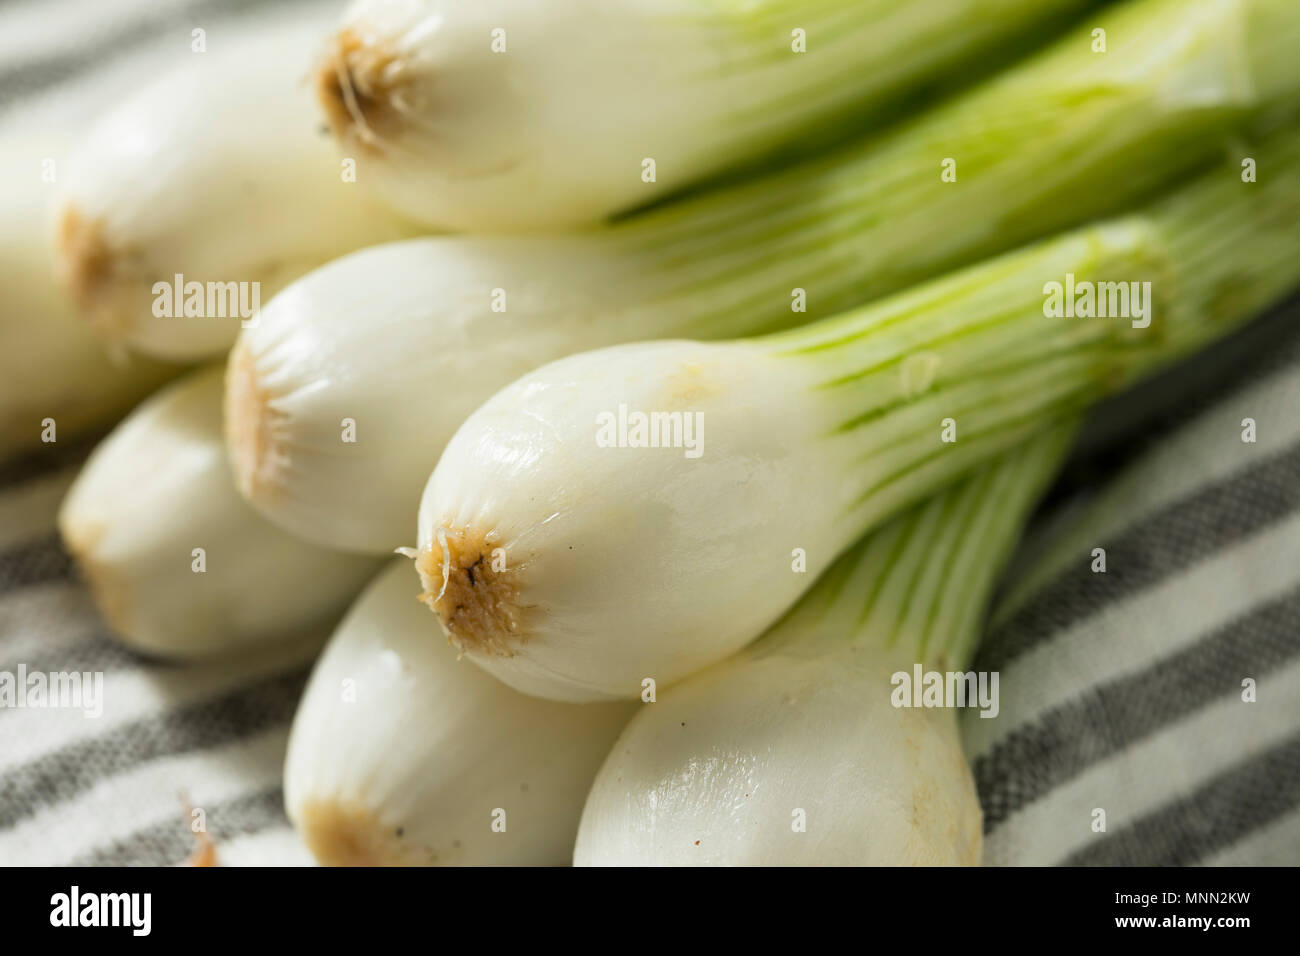 Raw Green Organic Spring Bulb Onions Ready to Cook With Stock Photo